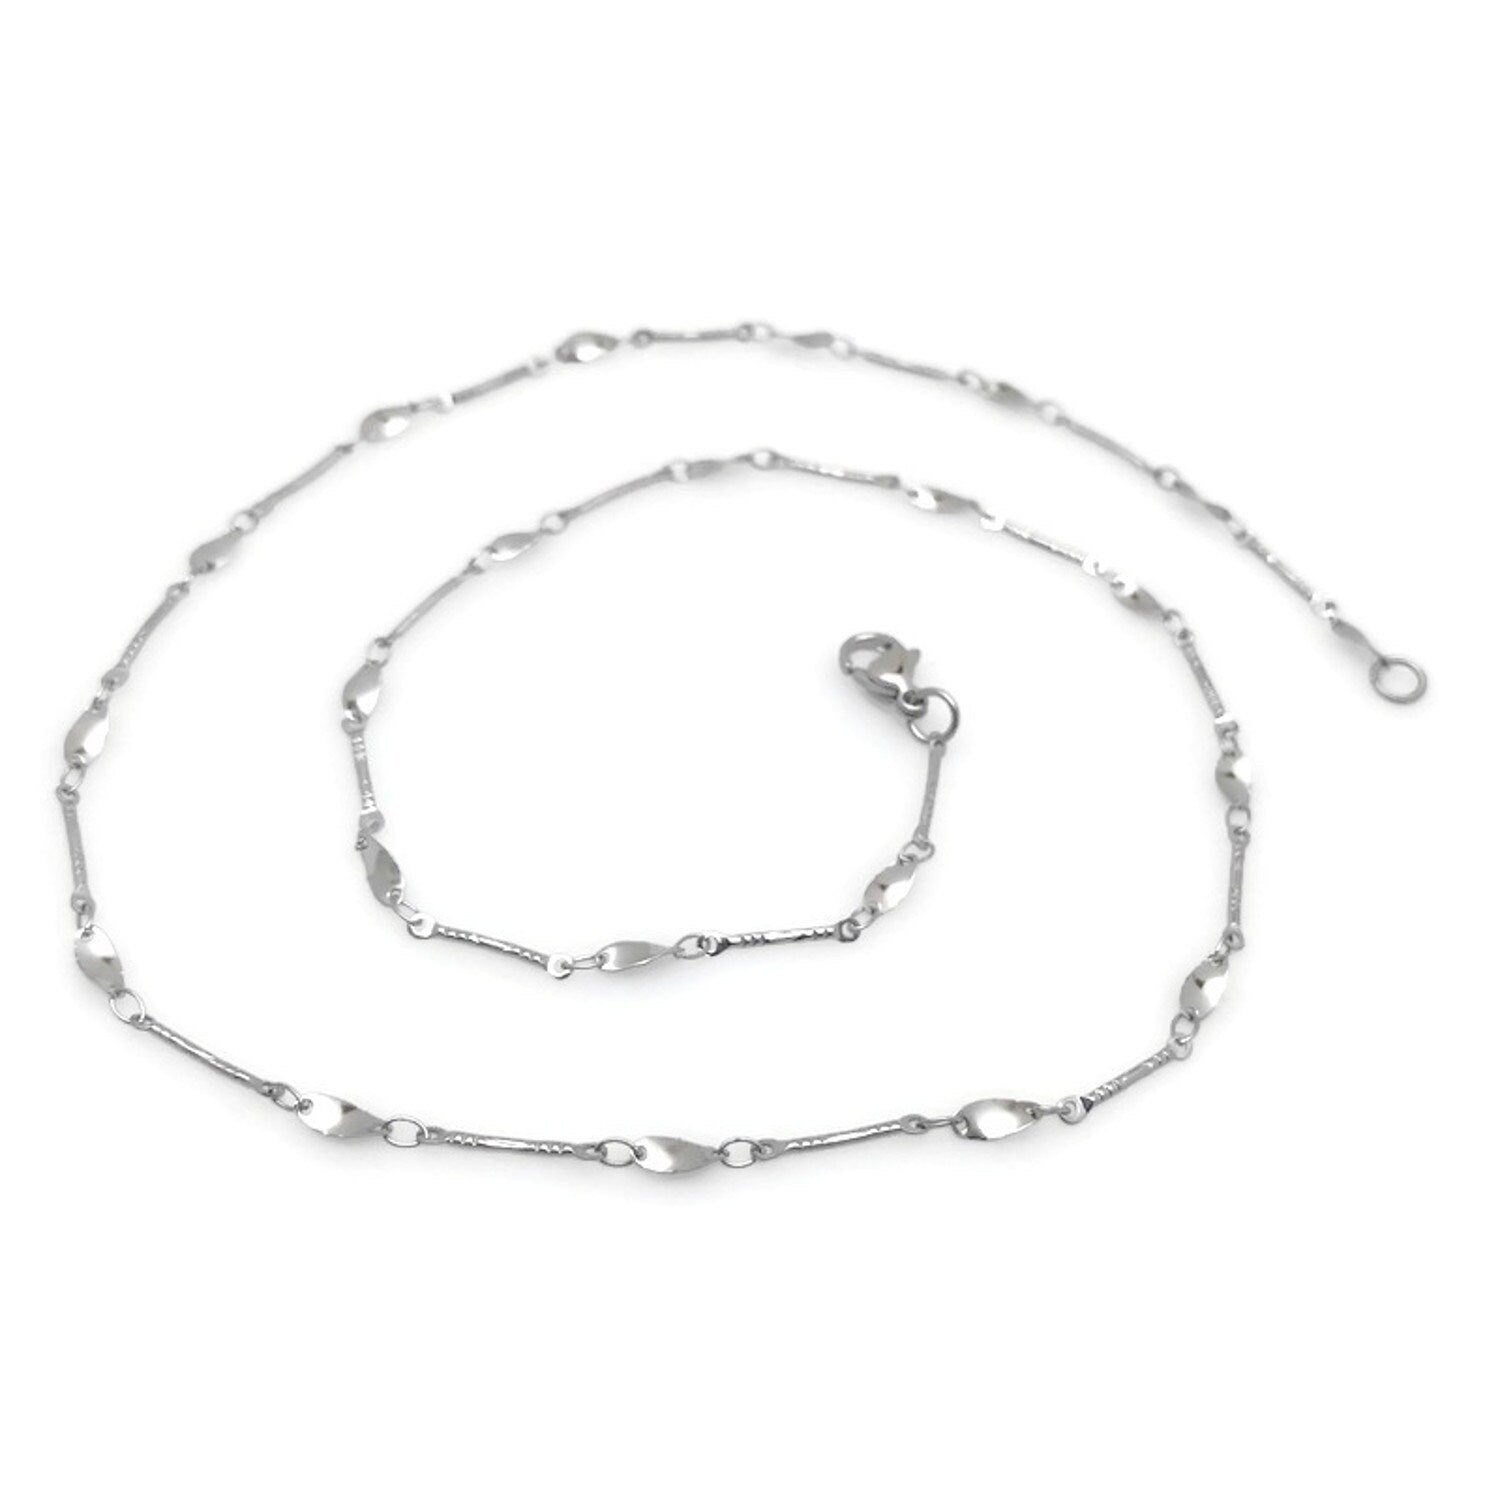 Twisted Silver Chain, Stainless Steel Necklace, Non Tarnish Chain, layering necklace chain, gift for sister, waterproof jewelry